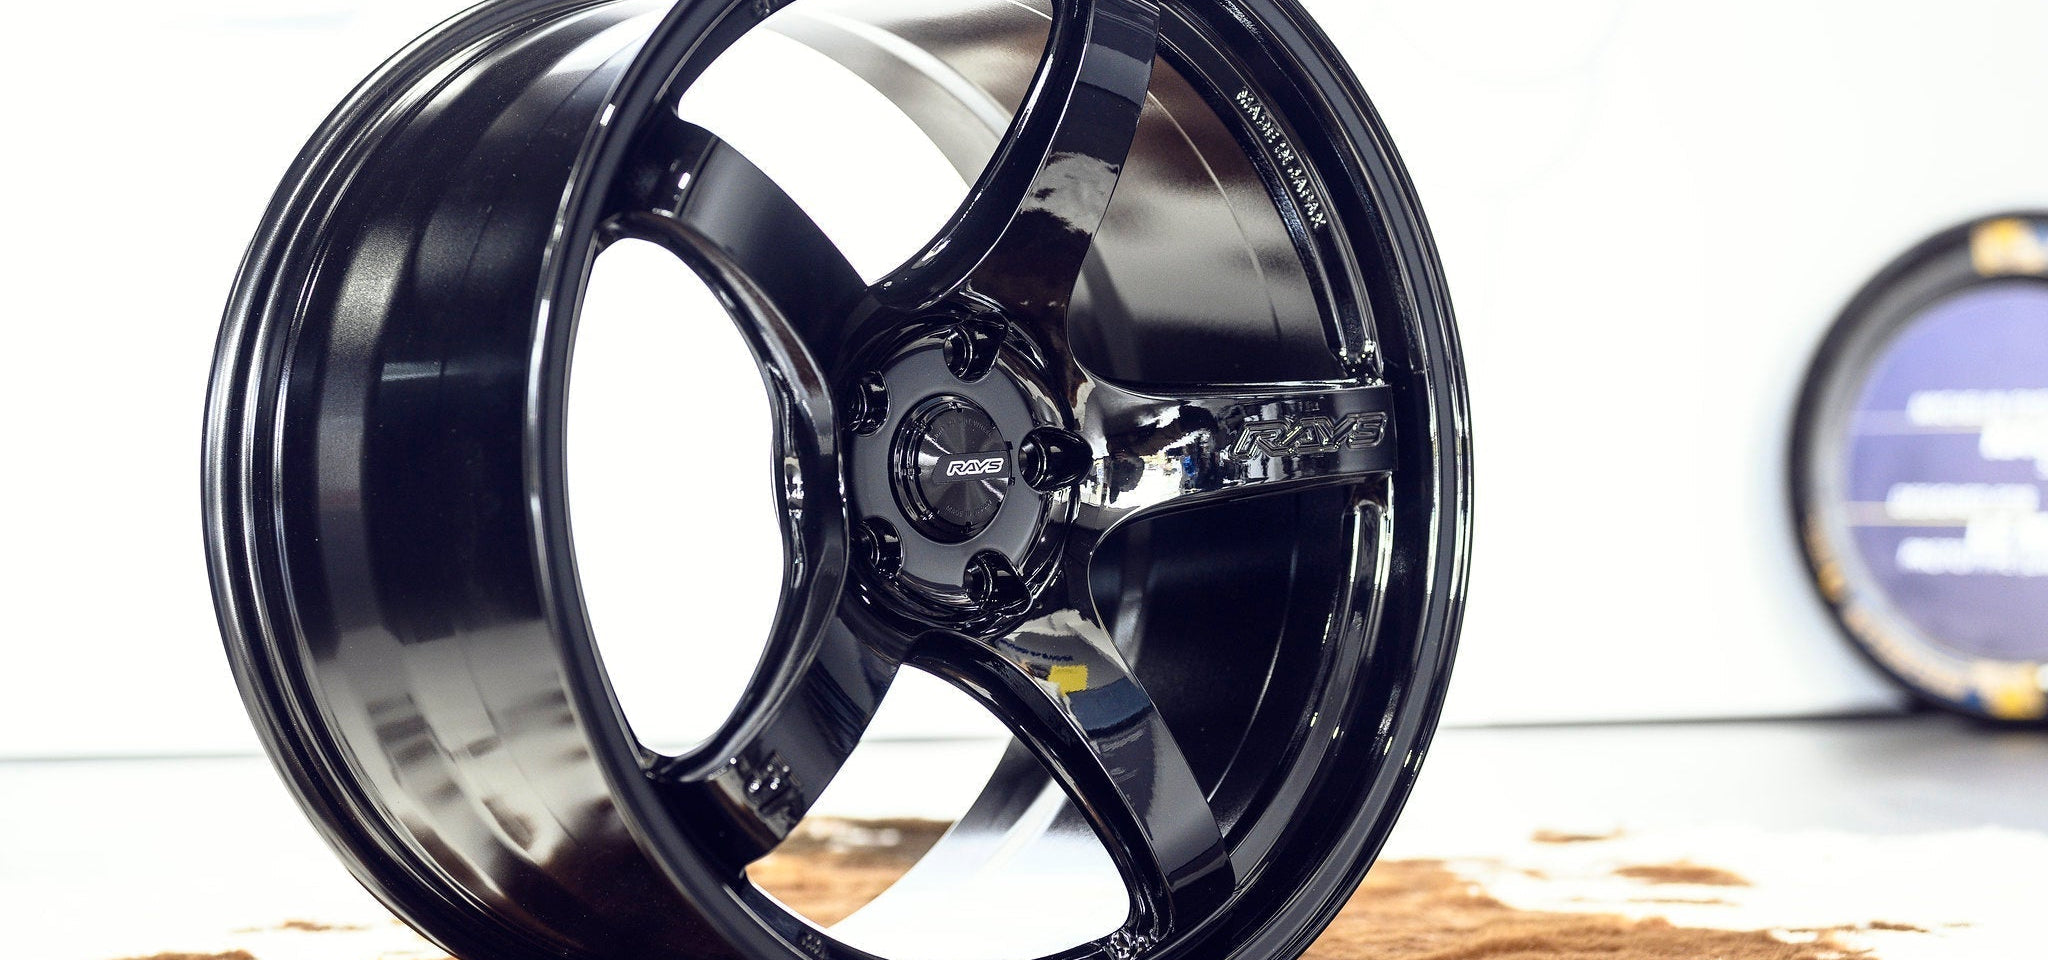 gramLIGHTS 57CR 17" - Premium Wheels from Gram Lights - From just $2000.0! Shop now at MK MOTORSPORTS